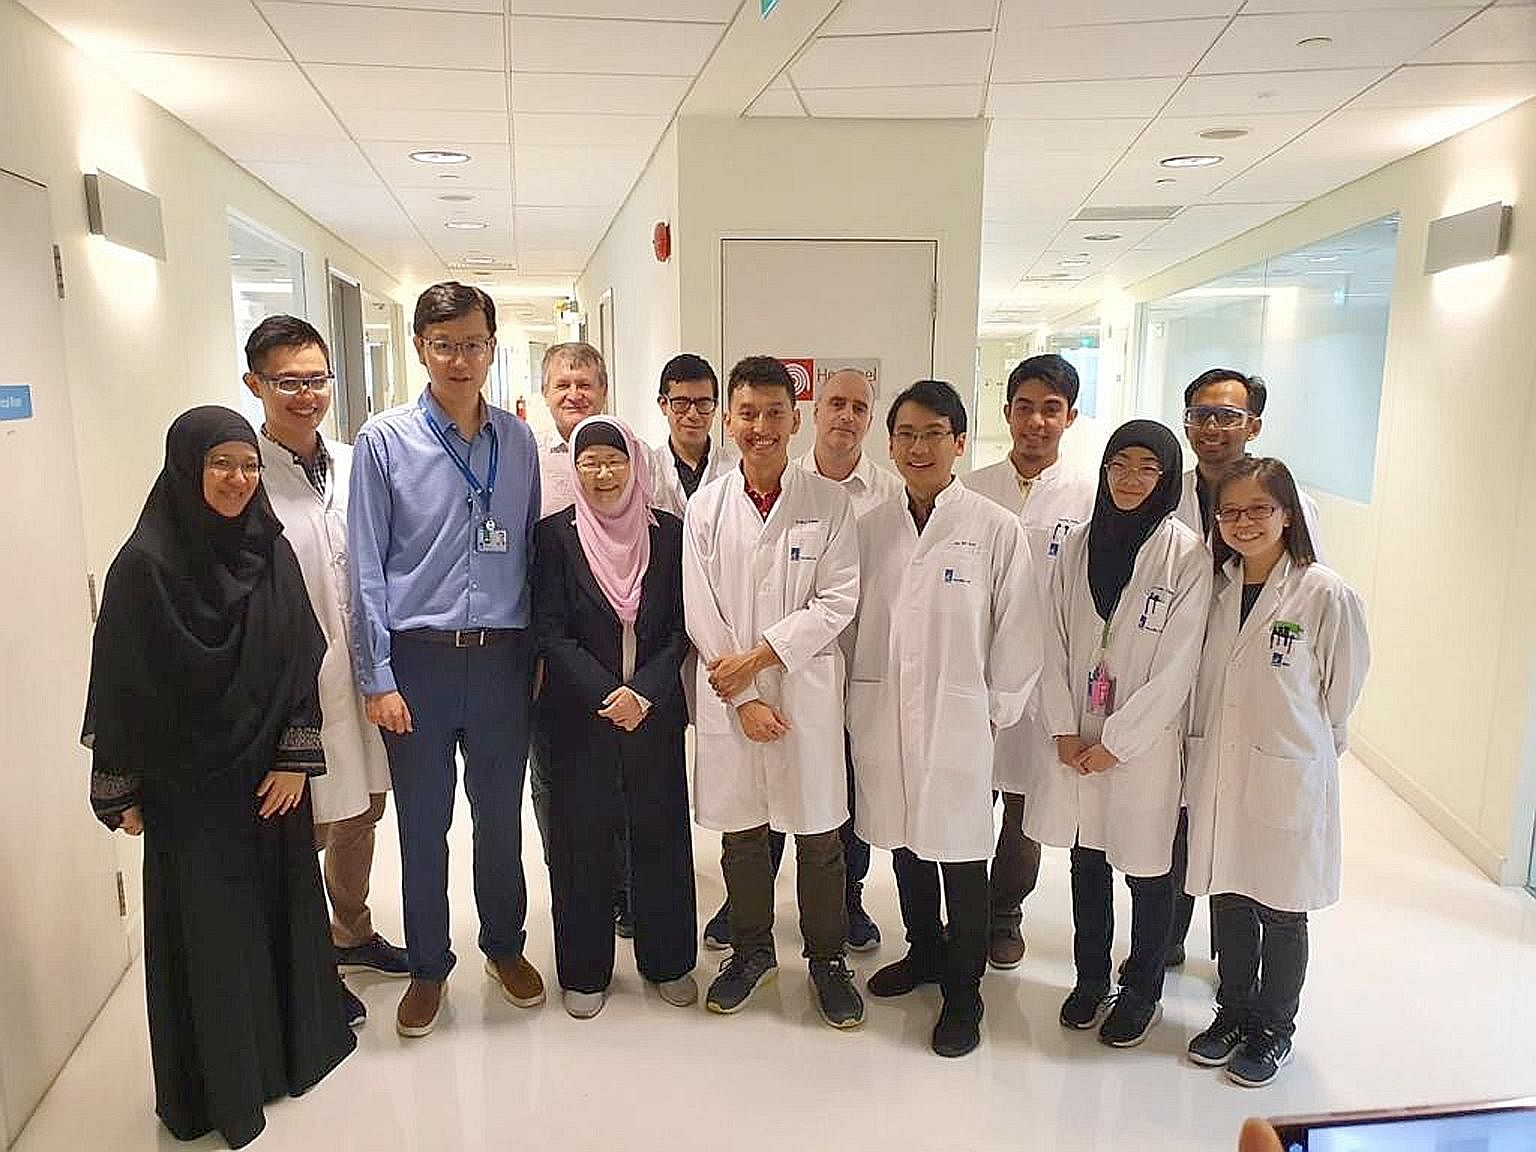 Professor Jackie Ying (in pink headgear), the head of A*Star's NanoBio Lab, said she and her team of scientists have been working tirelessly for around six weeks to come up with a rapid test that can tell if a person has Covid-19 in as little as five